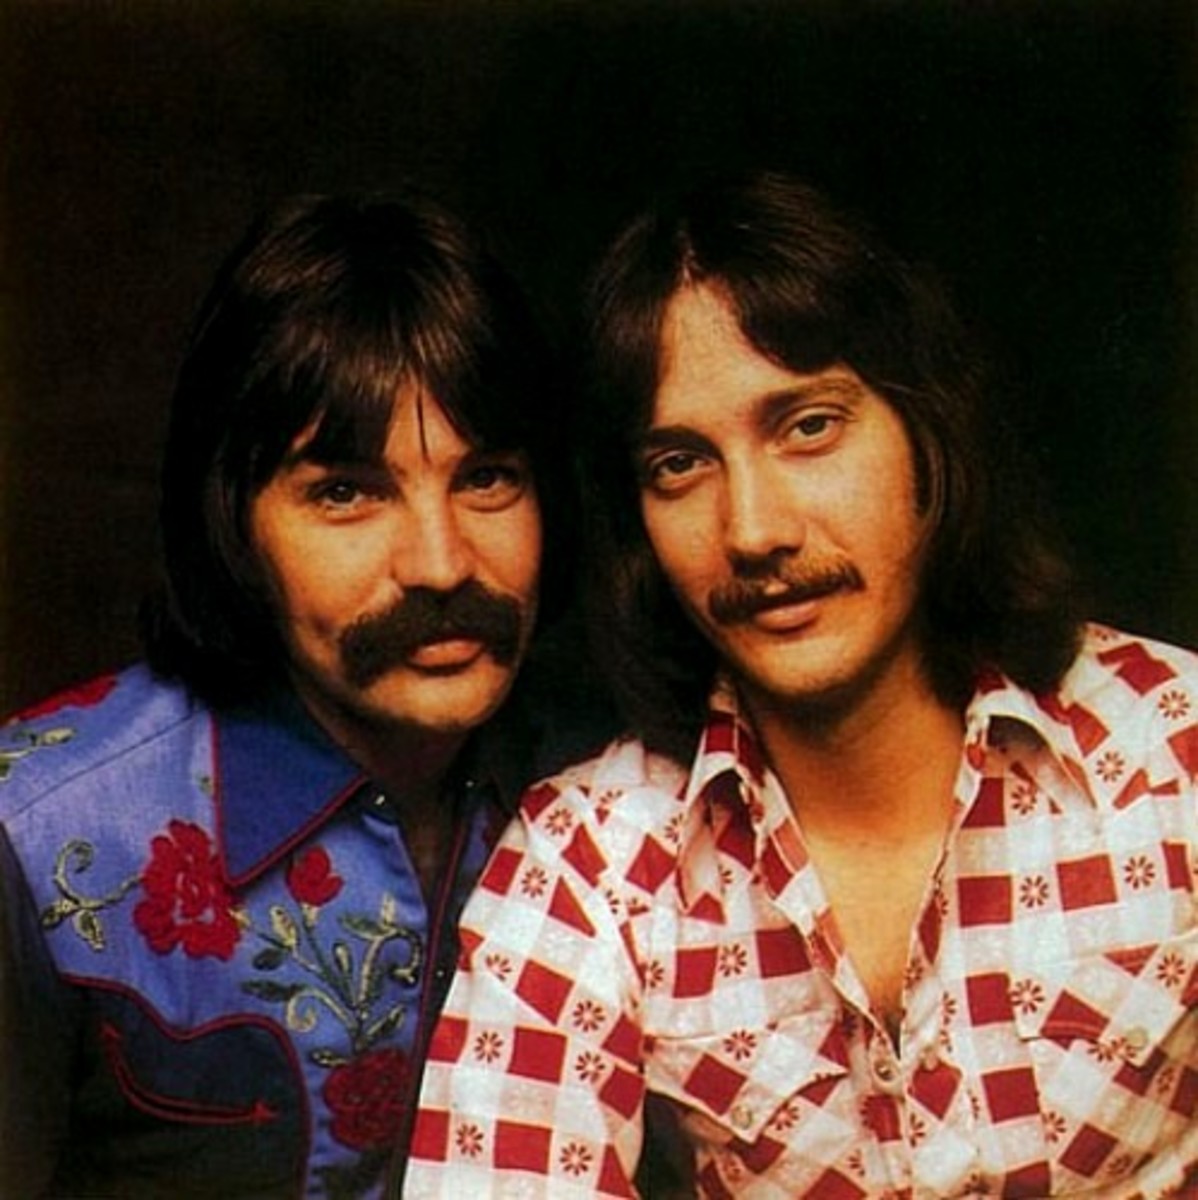  Tom Kelly (right) with Fools Gold bandmate Denny Henson